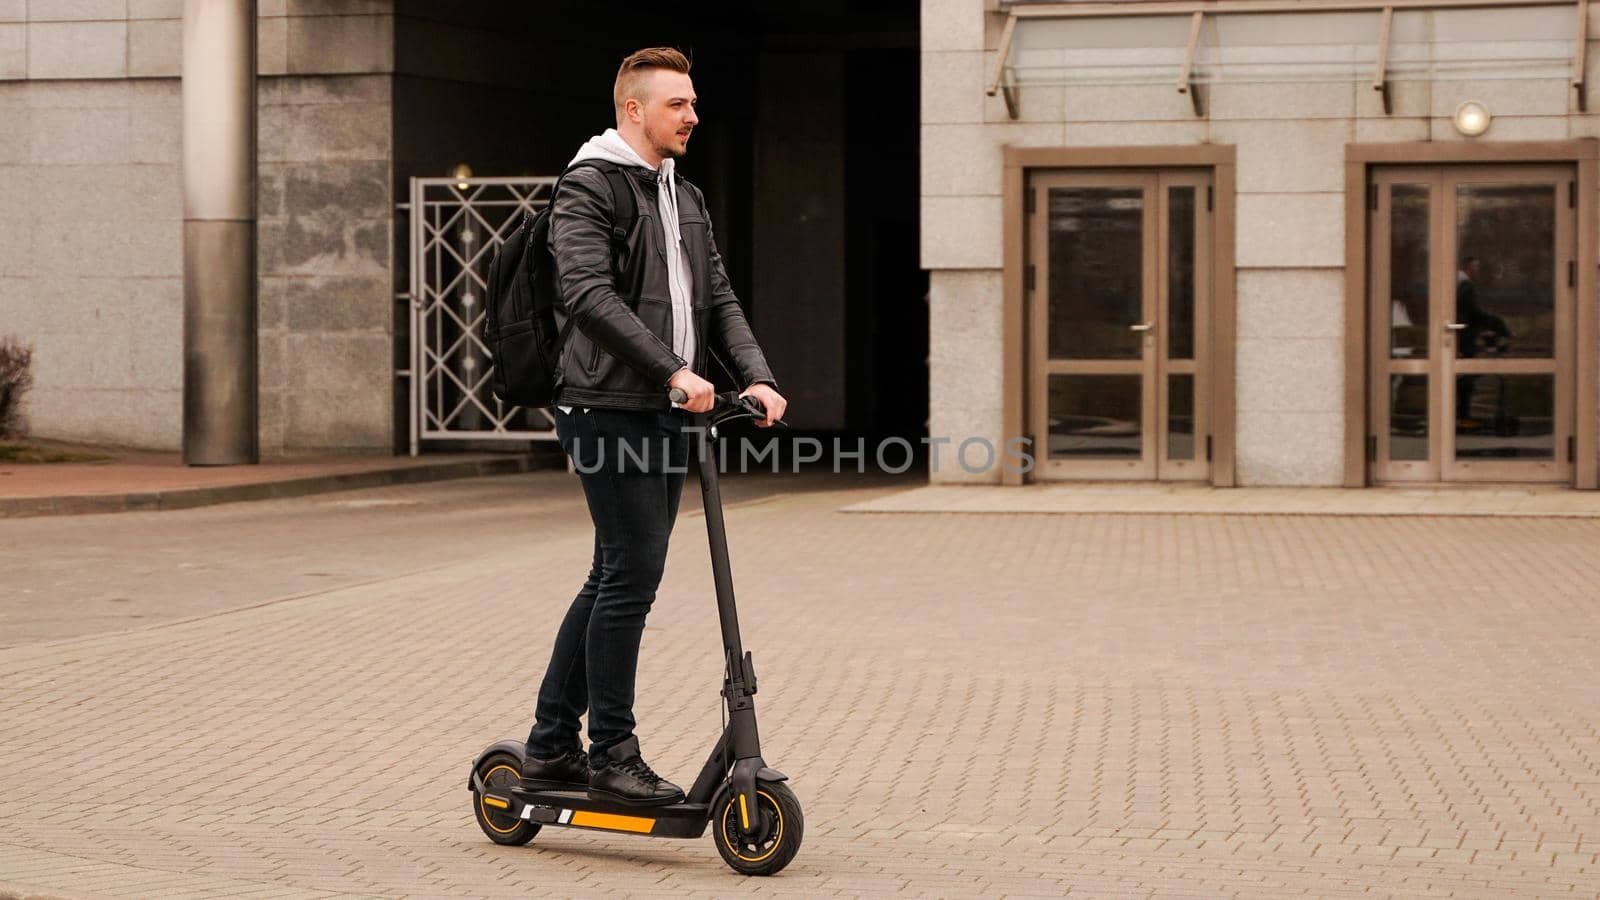 Tall man on an electric scooter against the backdrop of gray city buildings. Guy in a black leather jacket